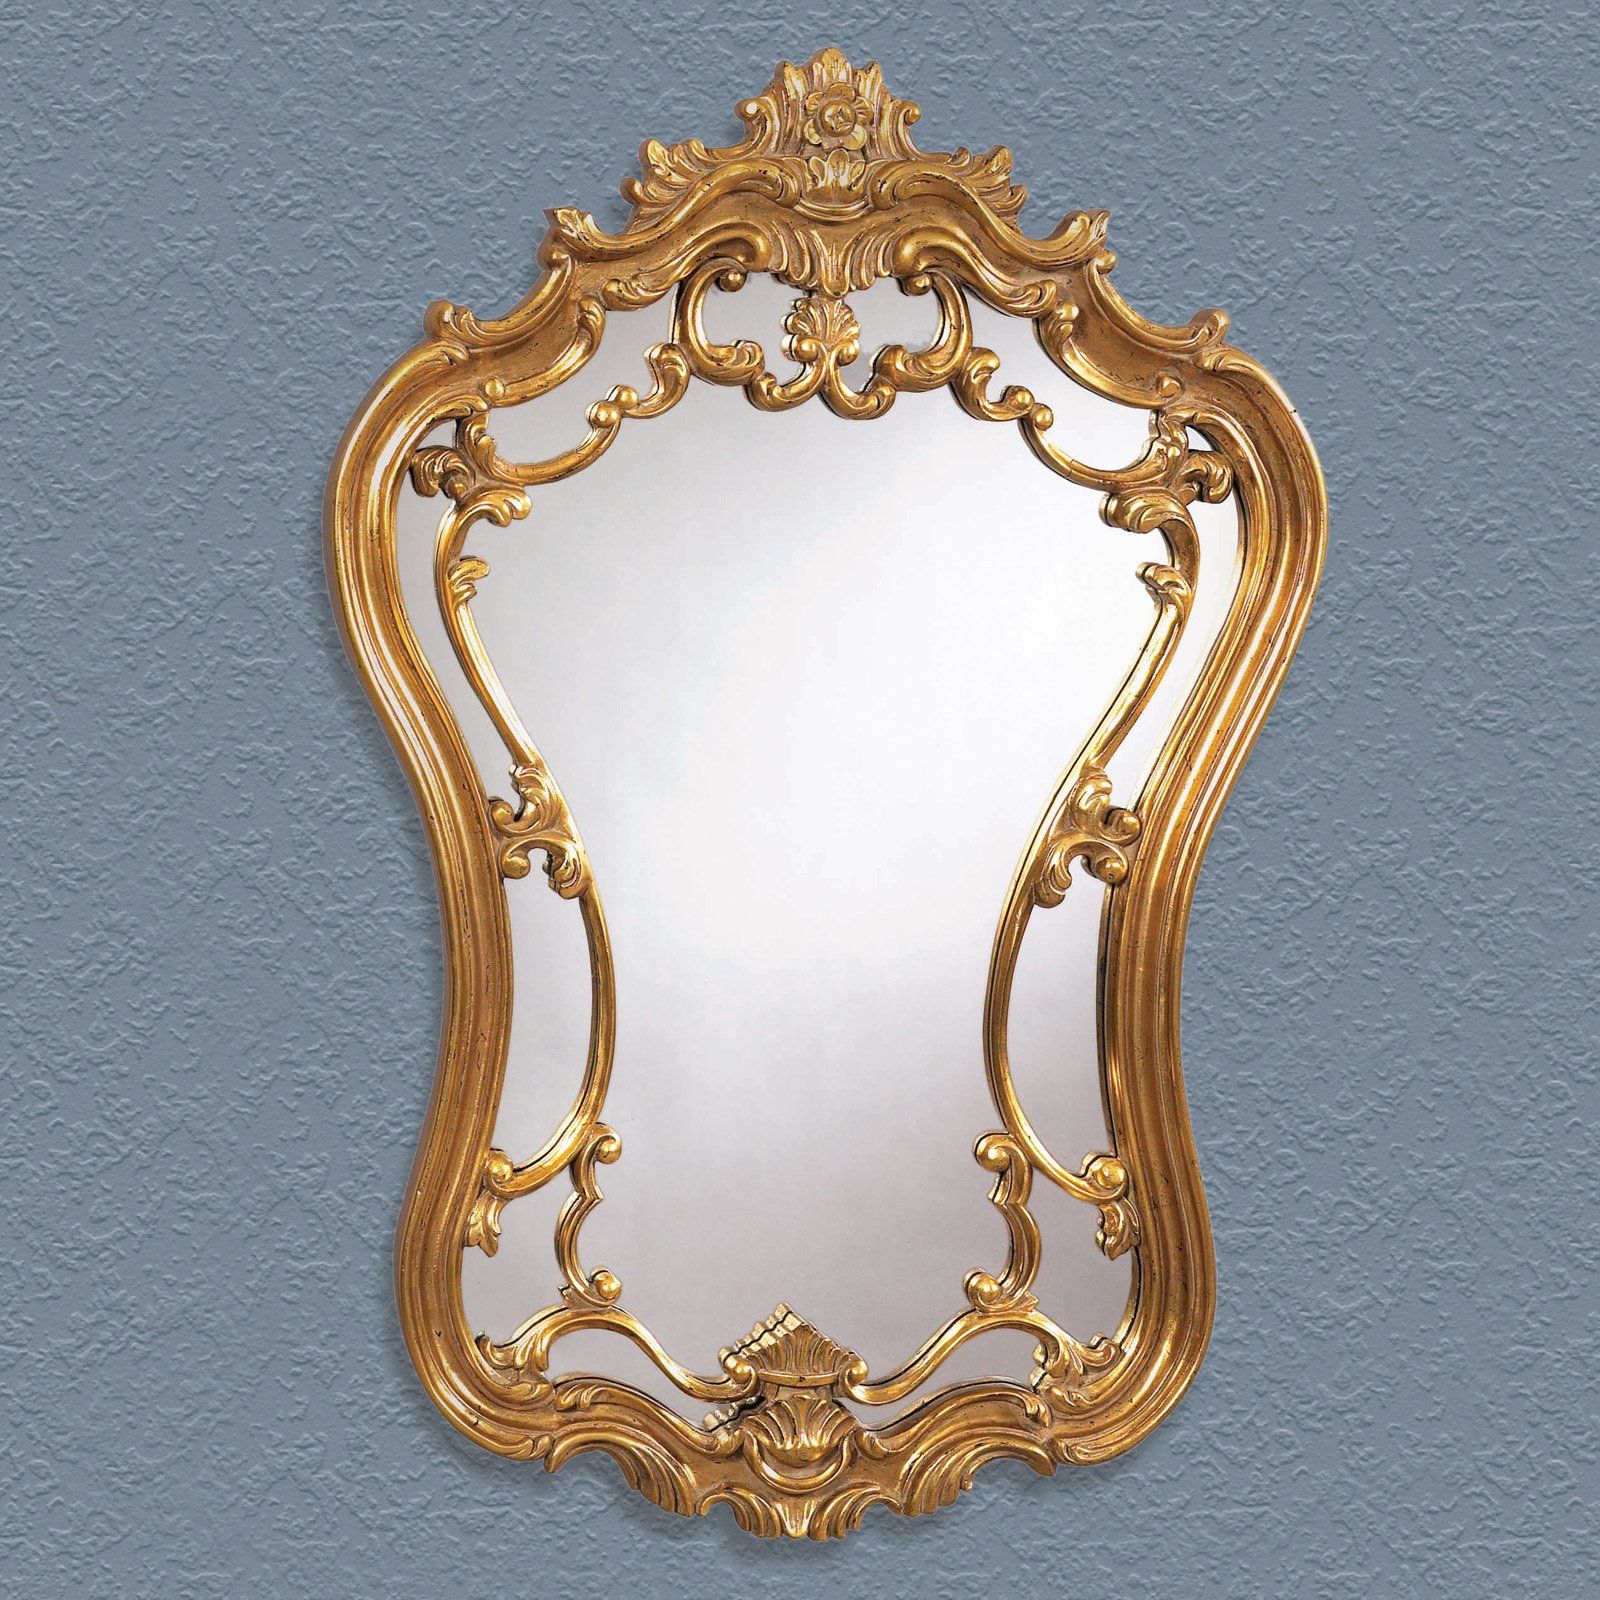 Antique Gold Ornate Arched Wall Mirror – 24w X 35h In. With Gold Arch Wall Mirrors (Photo 18 of 30)